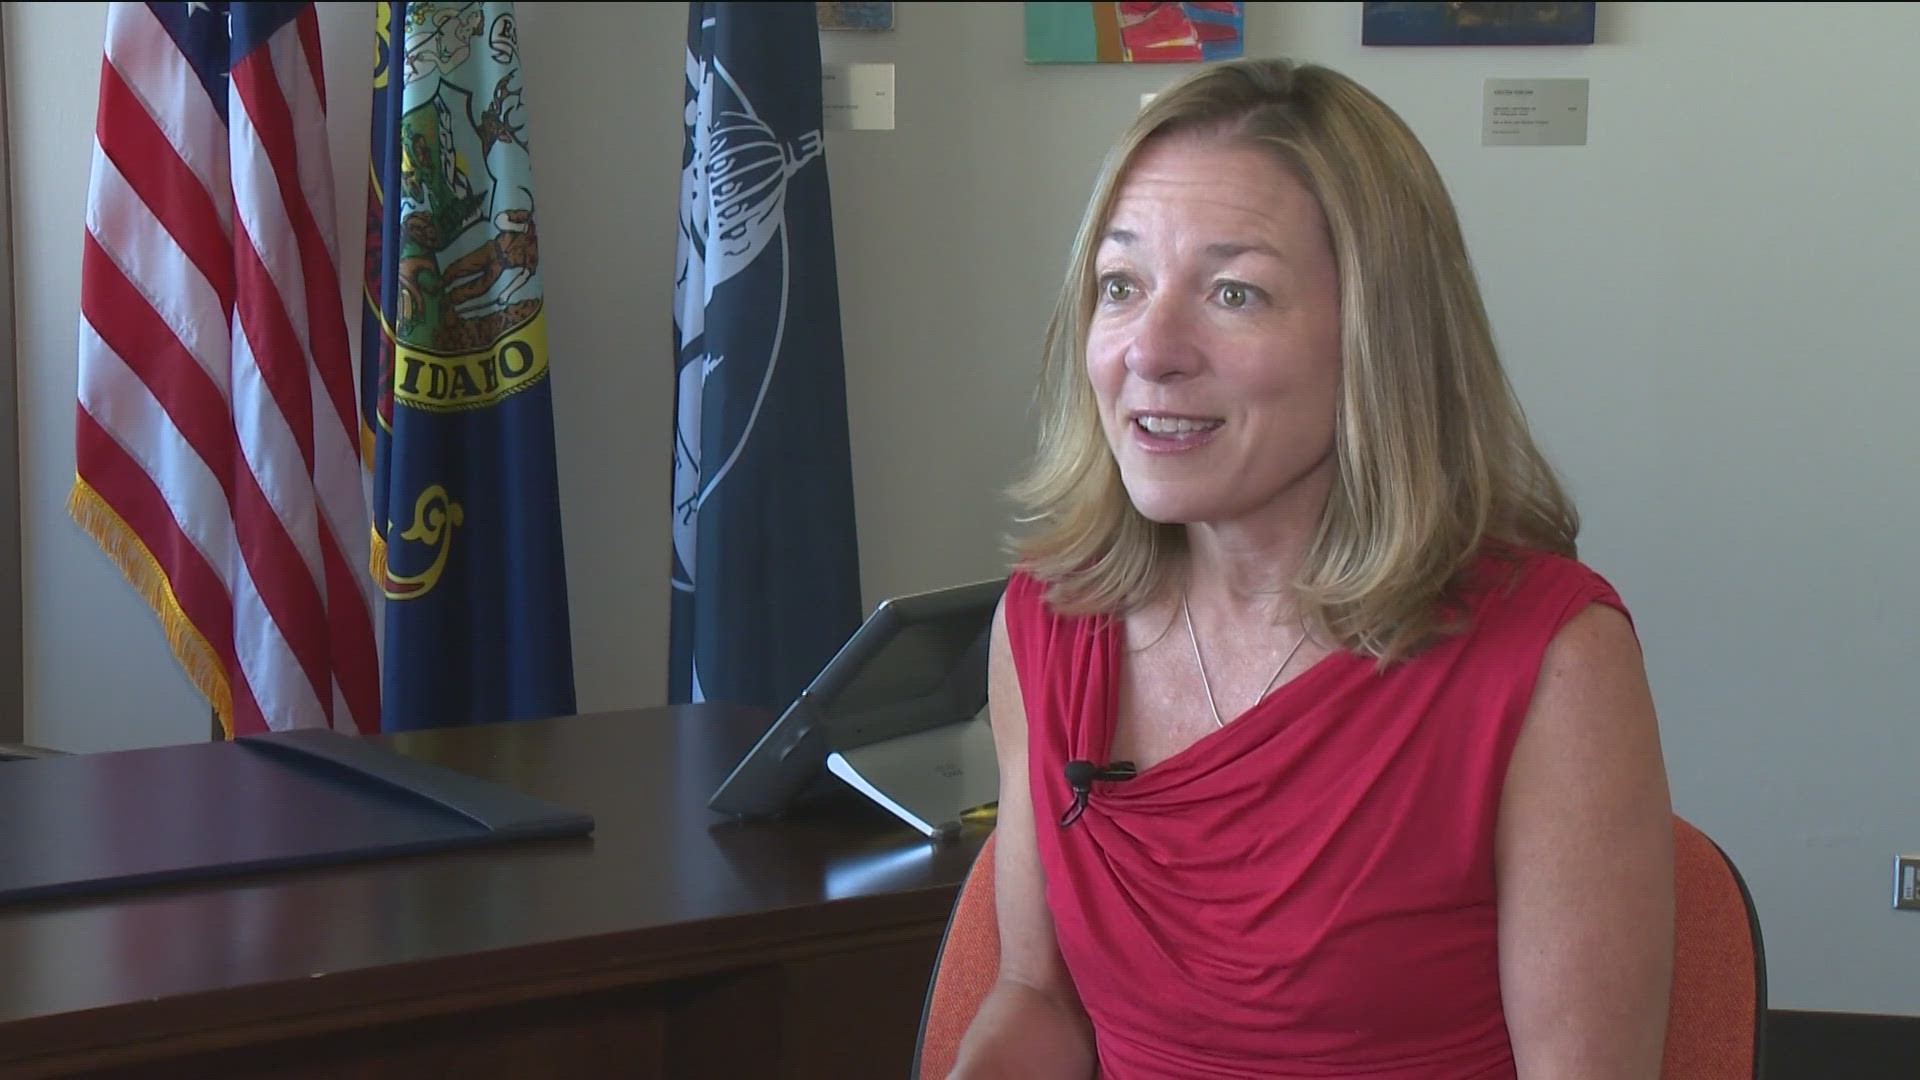 Boise City Council President Holli Woodings announced this week she will resign effective July 21.